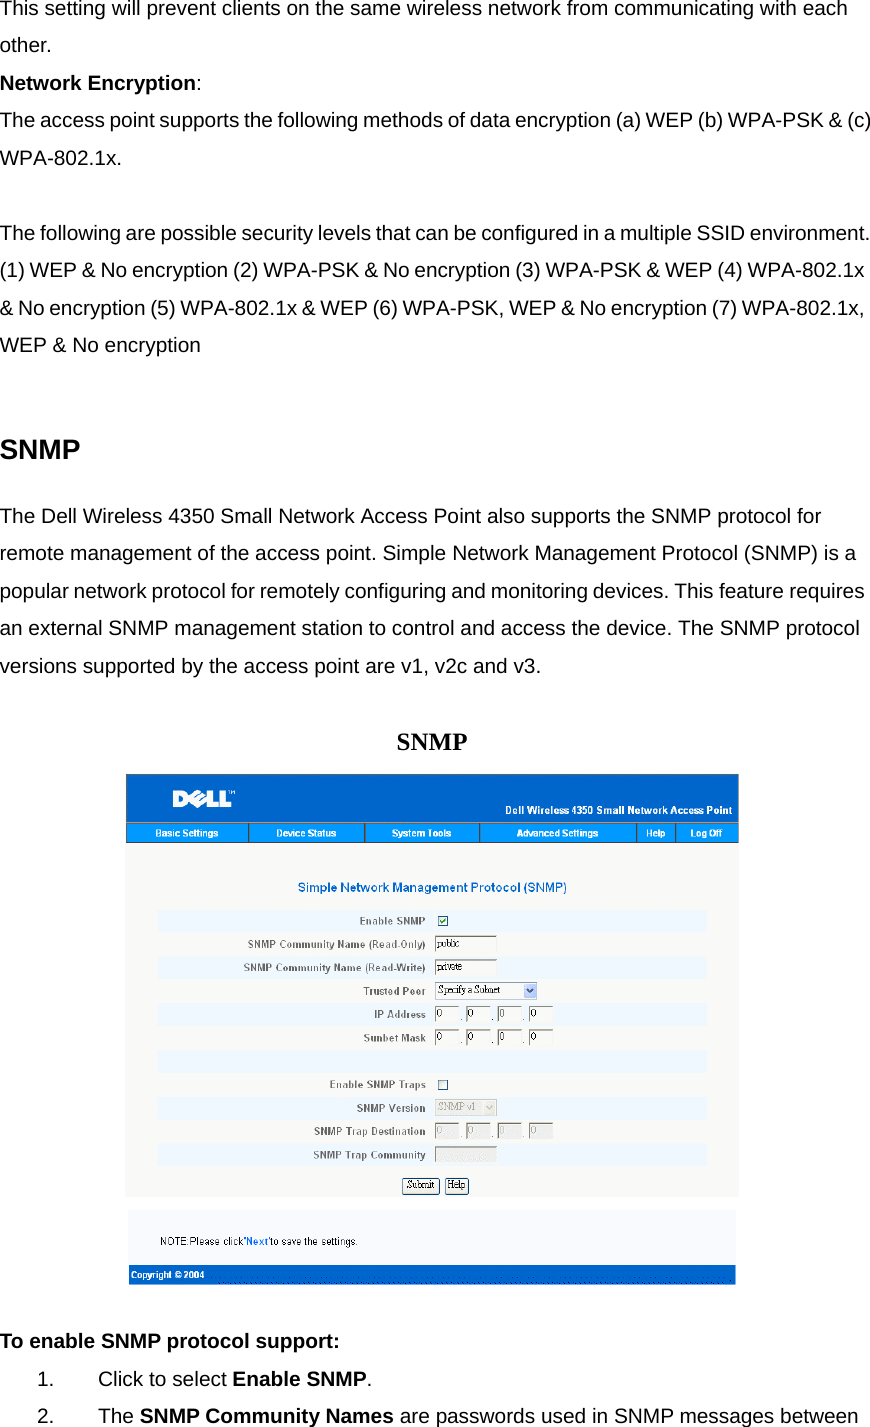 This setting will prevent clients on the same wireless network from communicating with each other. Network Encryption:     The access point supports the following methods of data encryption (a) WEP (b) WPA-PSK &amp; (c) WPA-802.1x.   The following are possible security levels that can be configured in a multiple SSID environment. (1) WEP &amp; No encryption (2) WPA-PSK &amp; No encryption (3) WPA-PSK &amp; WEP (4) WPA-802.1x &amp; No encryption (5) WPA-802.1x &amp; WEP (6) WPA-PSK, WEP &amp; No encryption (7) WPA-802.1x, WEP &amp; No encryption     SNMP The Dell Wireless 4350 Small Network Access Point also supports the SNMP protocol for remote management of the access point. Simple Network Management Protocol (SNMP) is a popular network protocol for remotely configuring and monitoring devices. This feature requires an external SNMP management station to control and access the device. The SNMP protocol versions supported by the access point are v1, v2c and v3.      SNMP      To enable SNMP protocol support: 1.            Click to select Enable SNMP.   2.            The SNMP Community Names are passwords used in SNMP messages between 